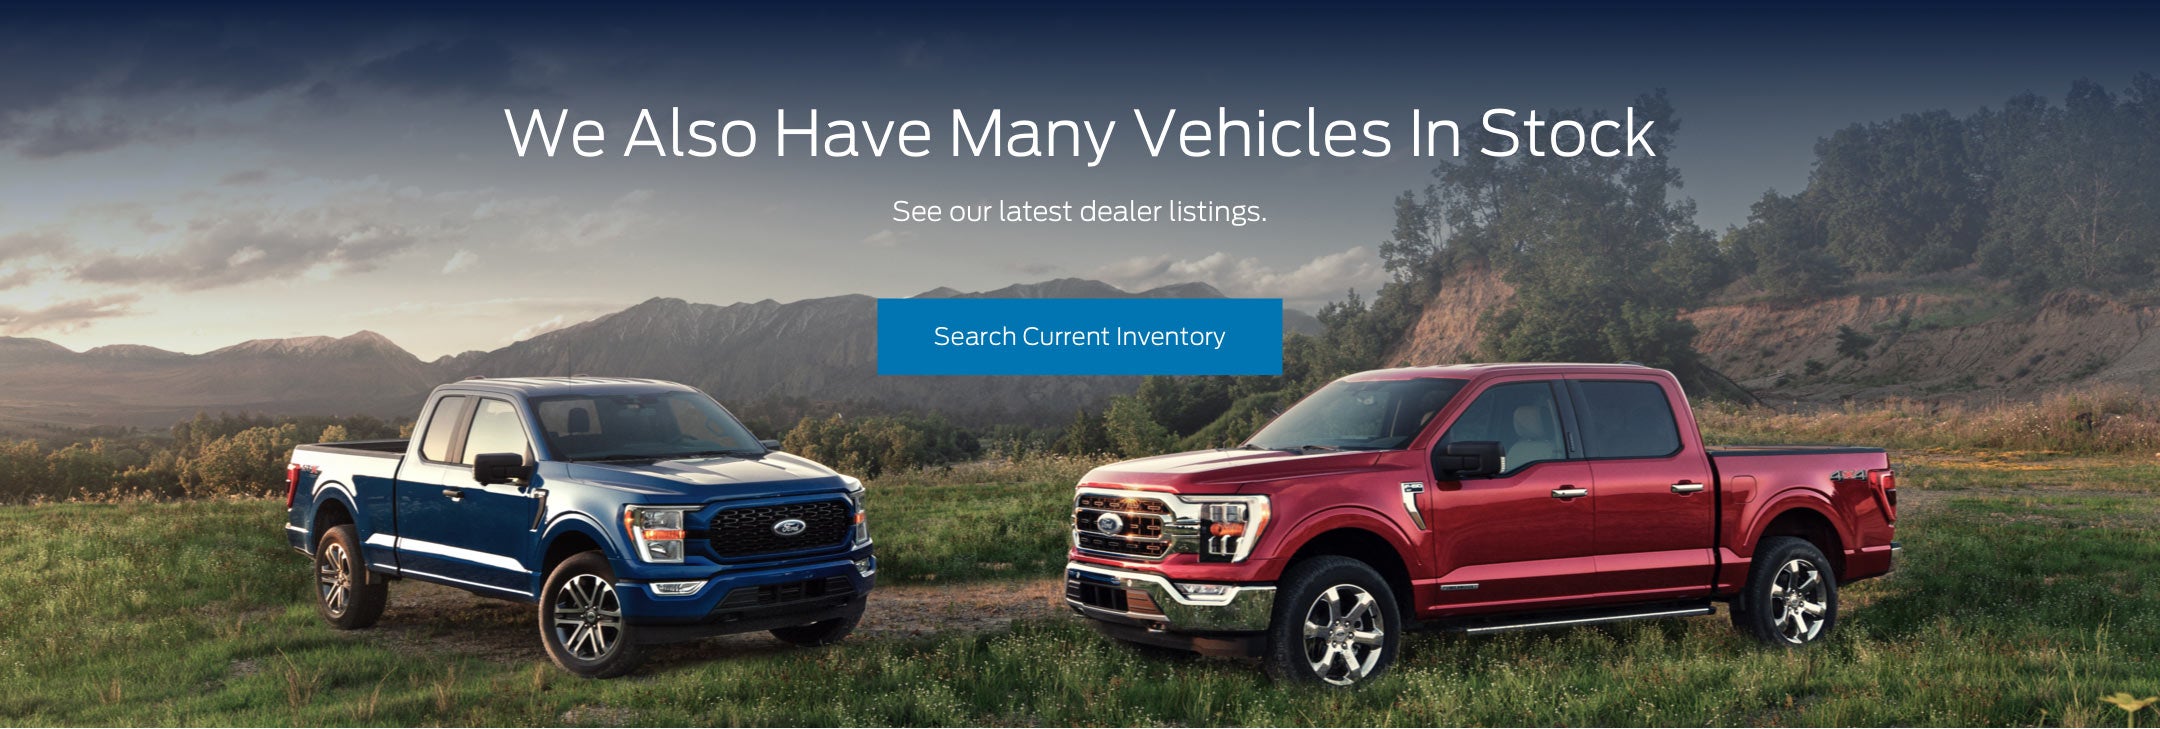 Ford vehicles in stock | Englewood Ford in Englewood FL